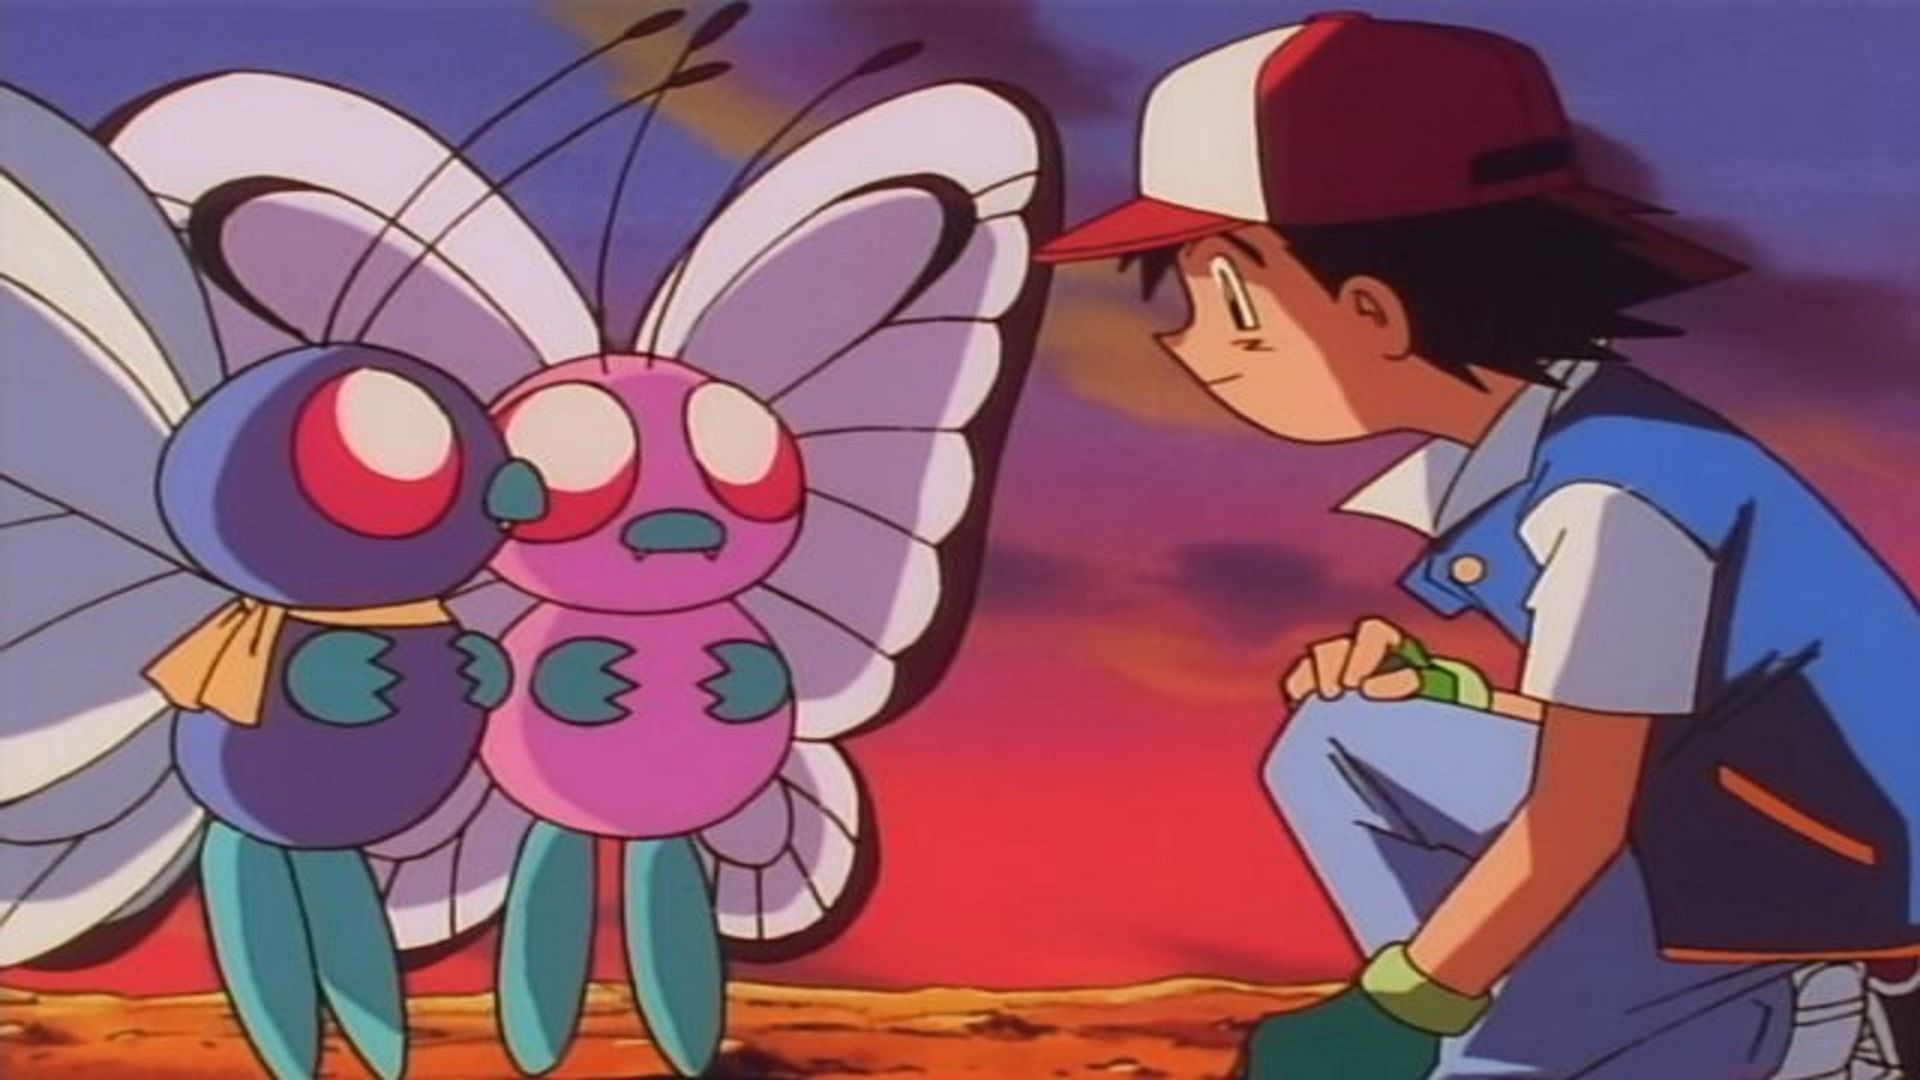 Ash reunites with Butterfree by Pokemonsketchartist on DeviantArt